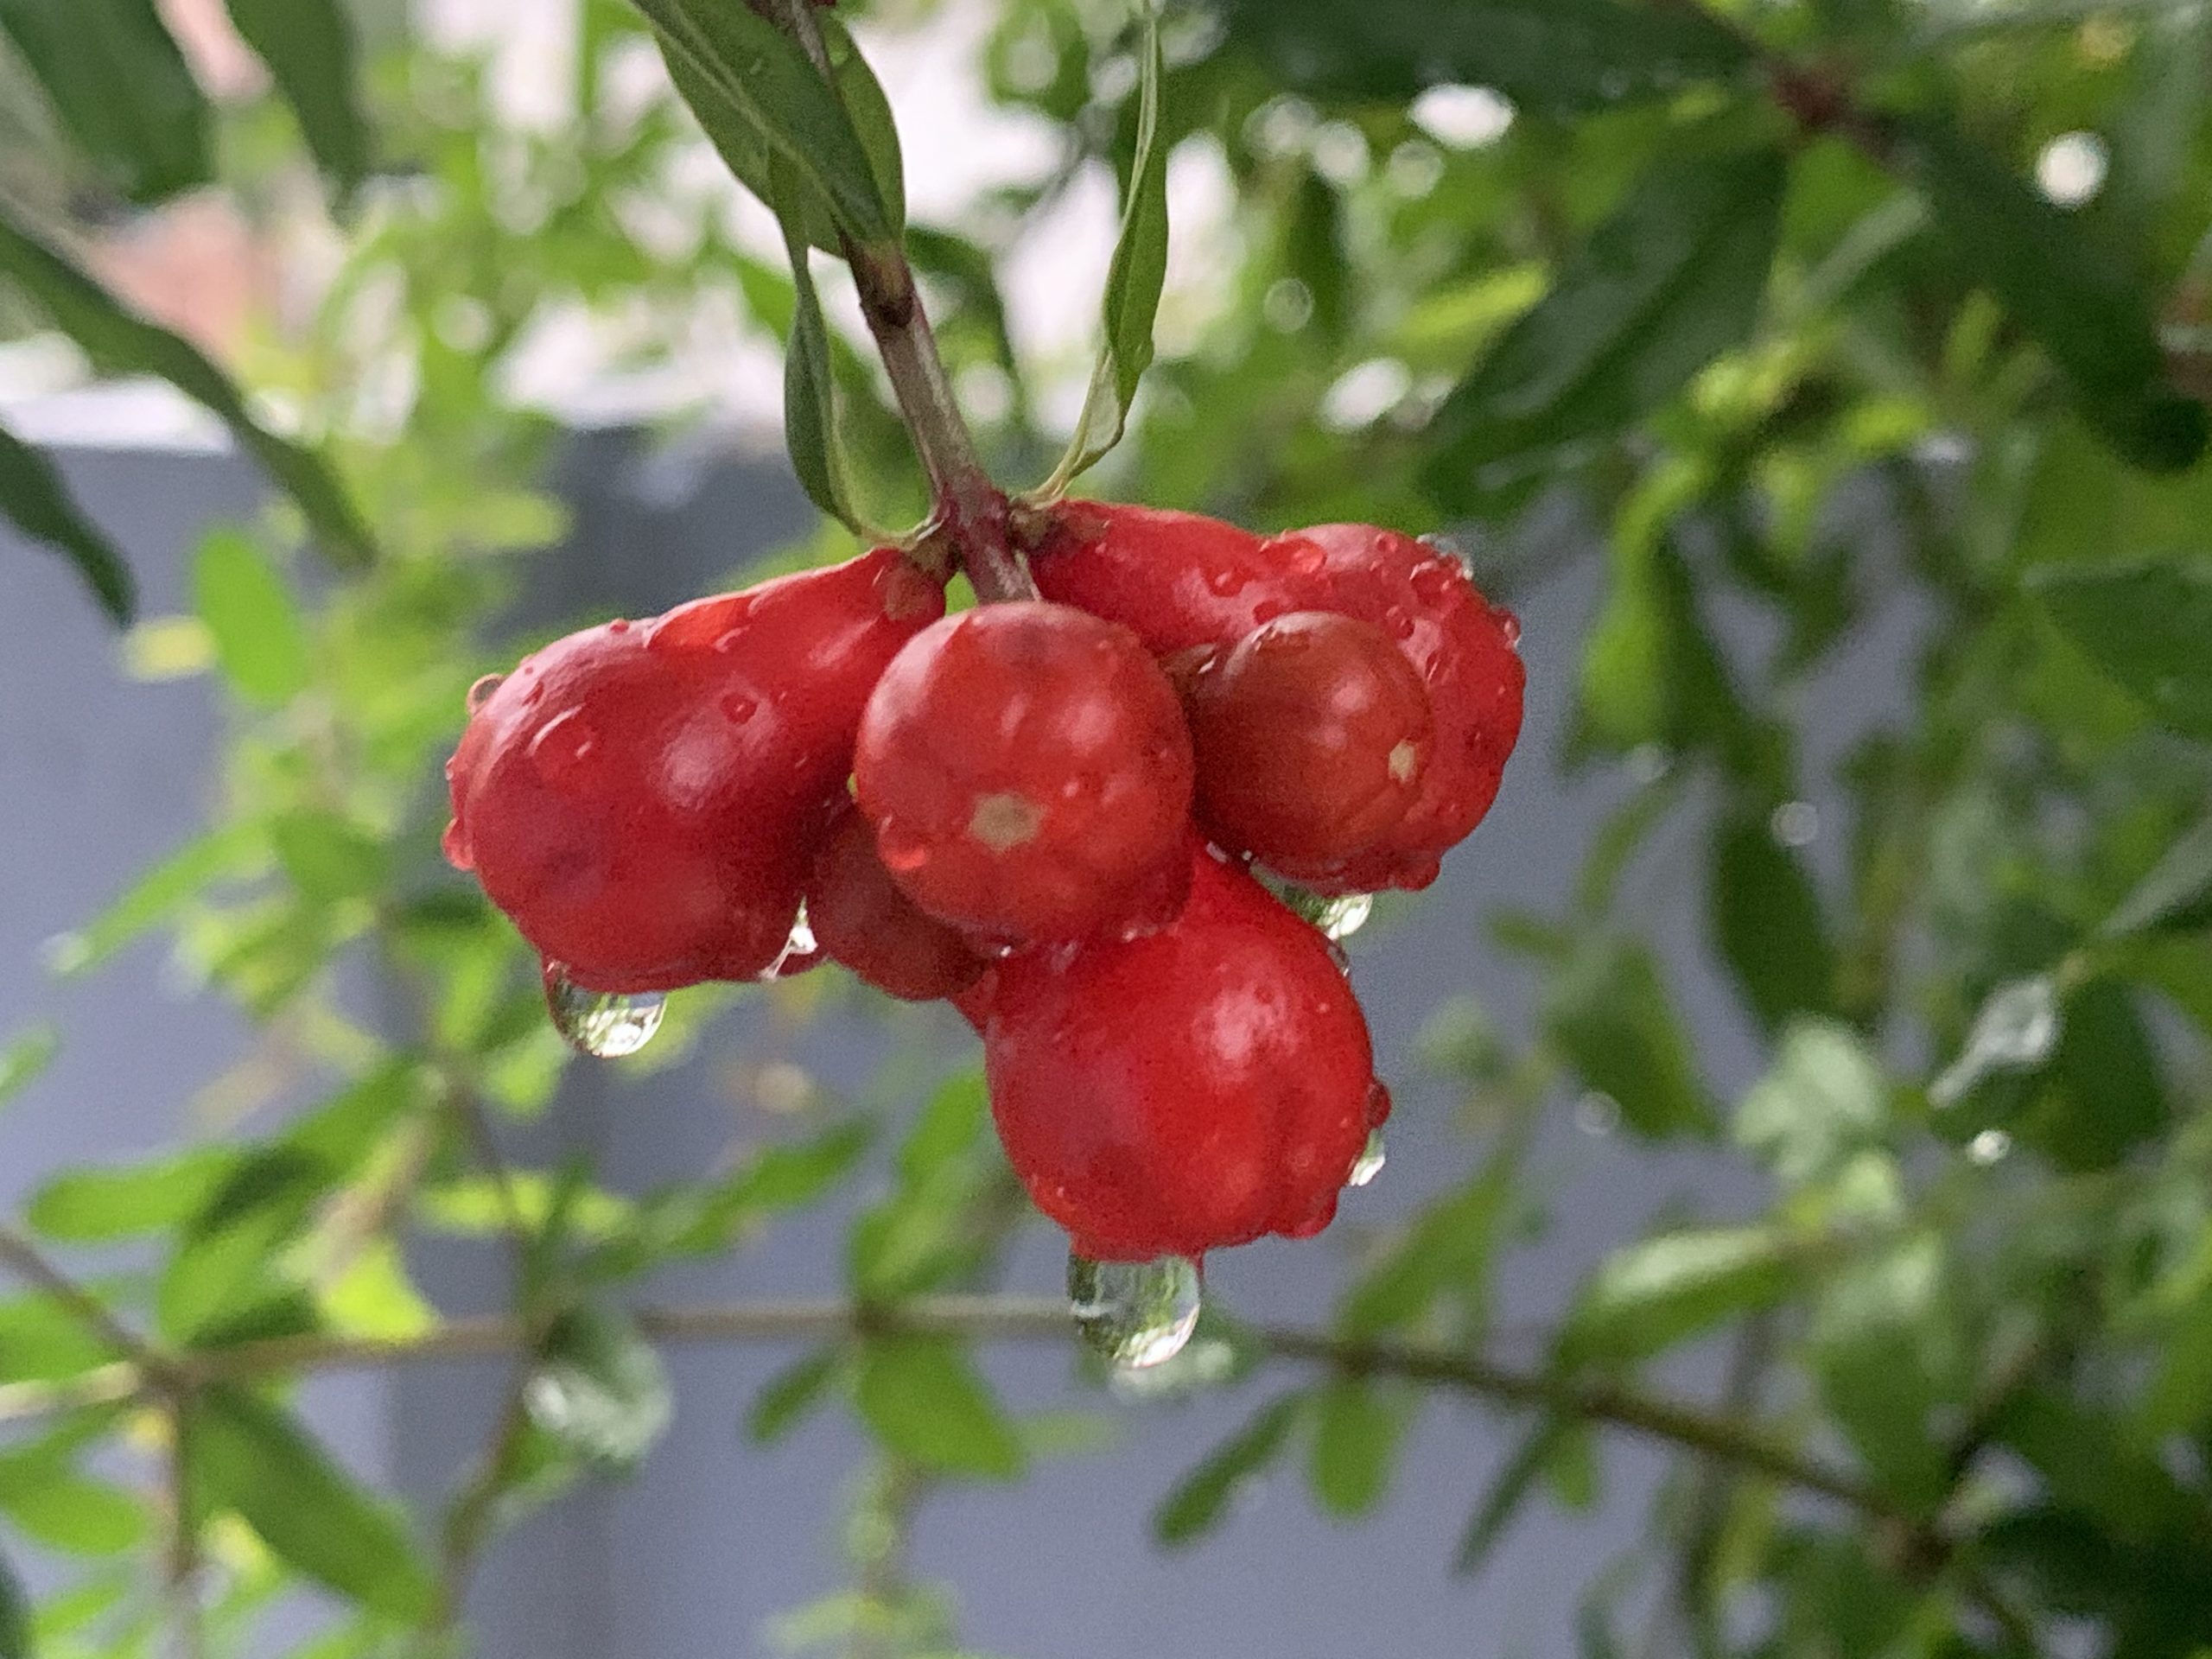 Pomegranate buds with rain drops